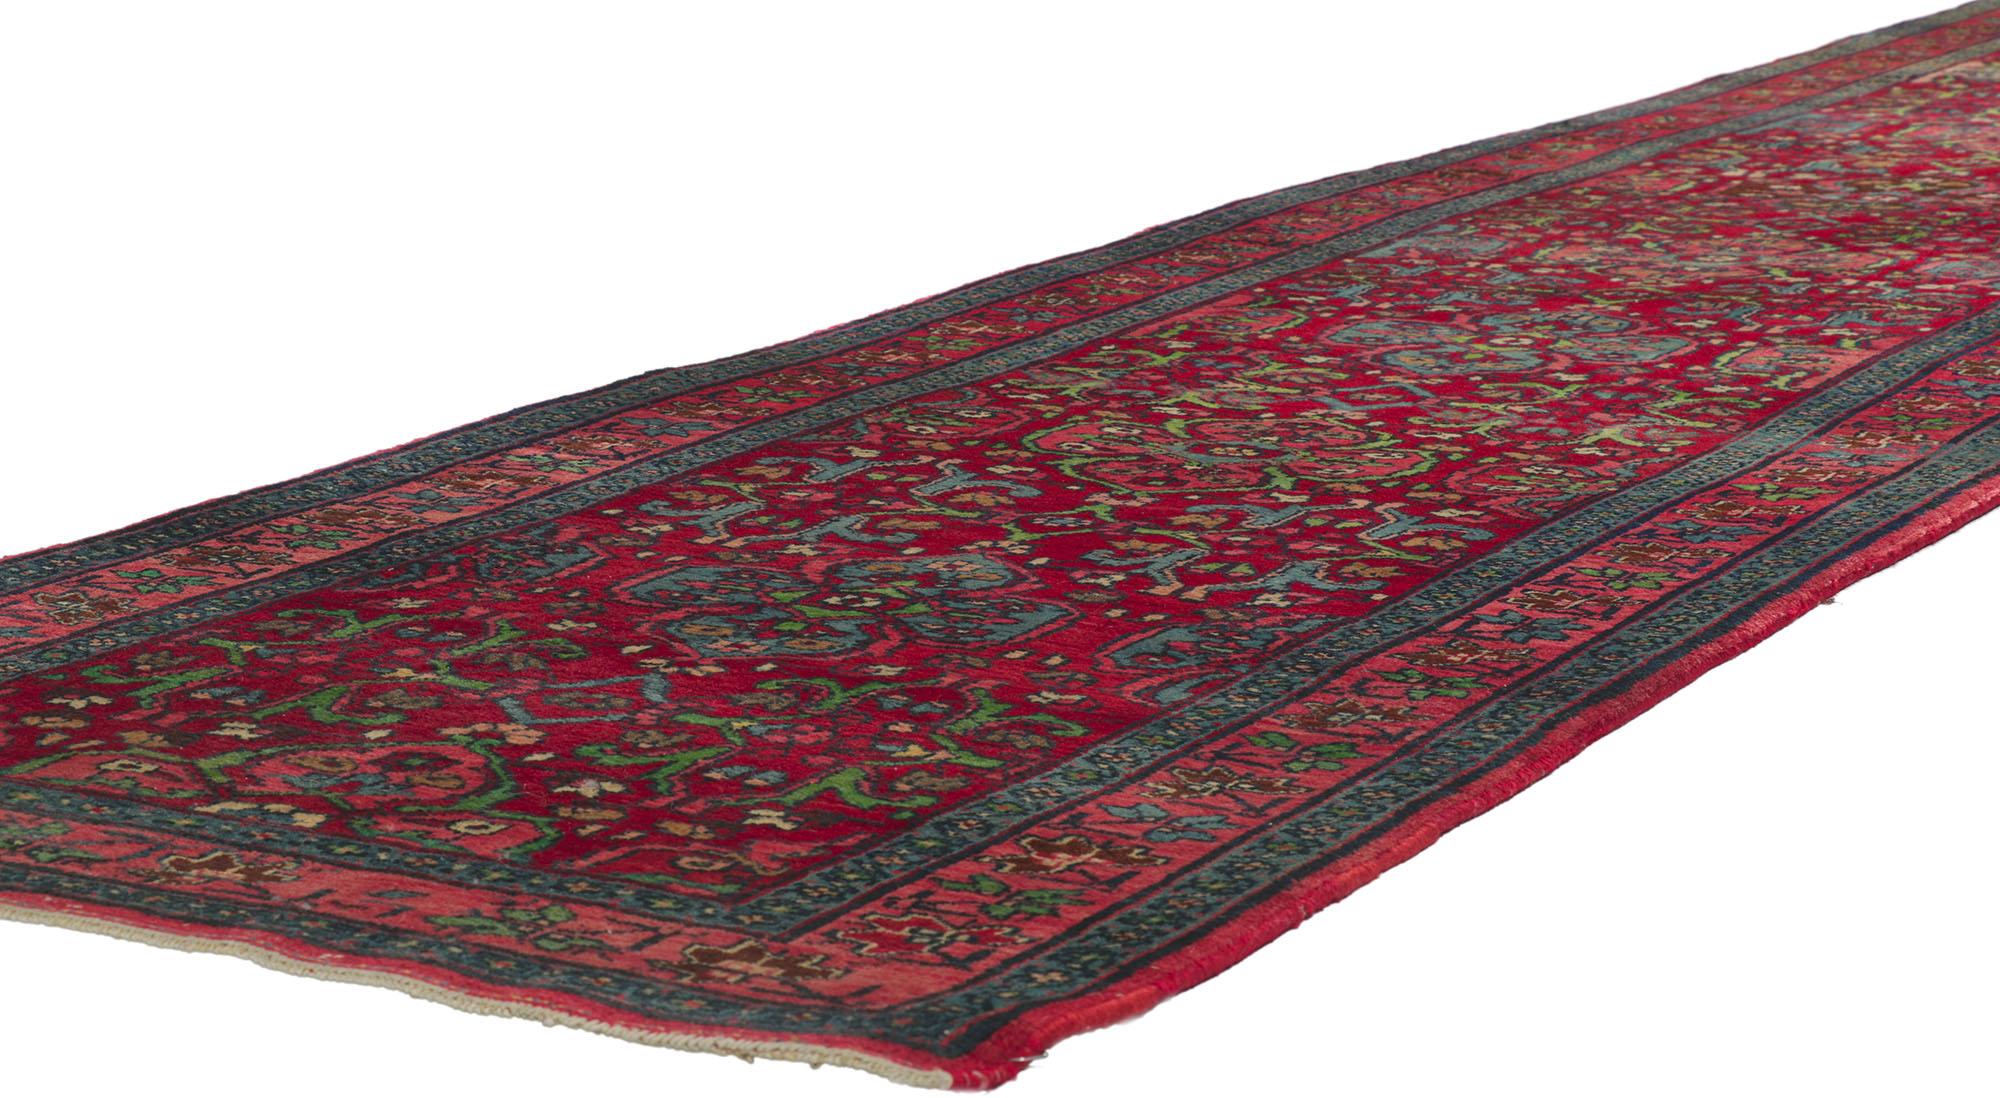 78281 Antique Persian Bijar runner 3'08 x 18'03. Full of tiny details and a bold expressive design combined with tribal style, this hand-knotted wool antique Persian Bijar runner is a captivating vision of woven beauty. The abrashed red field